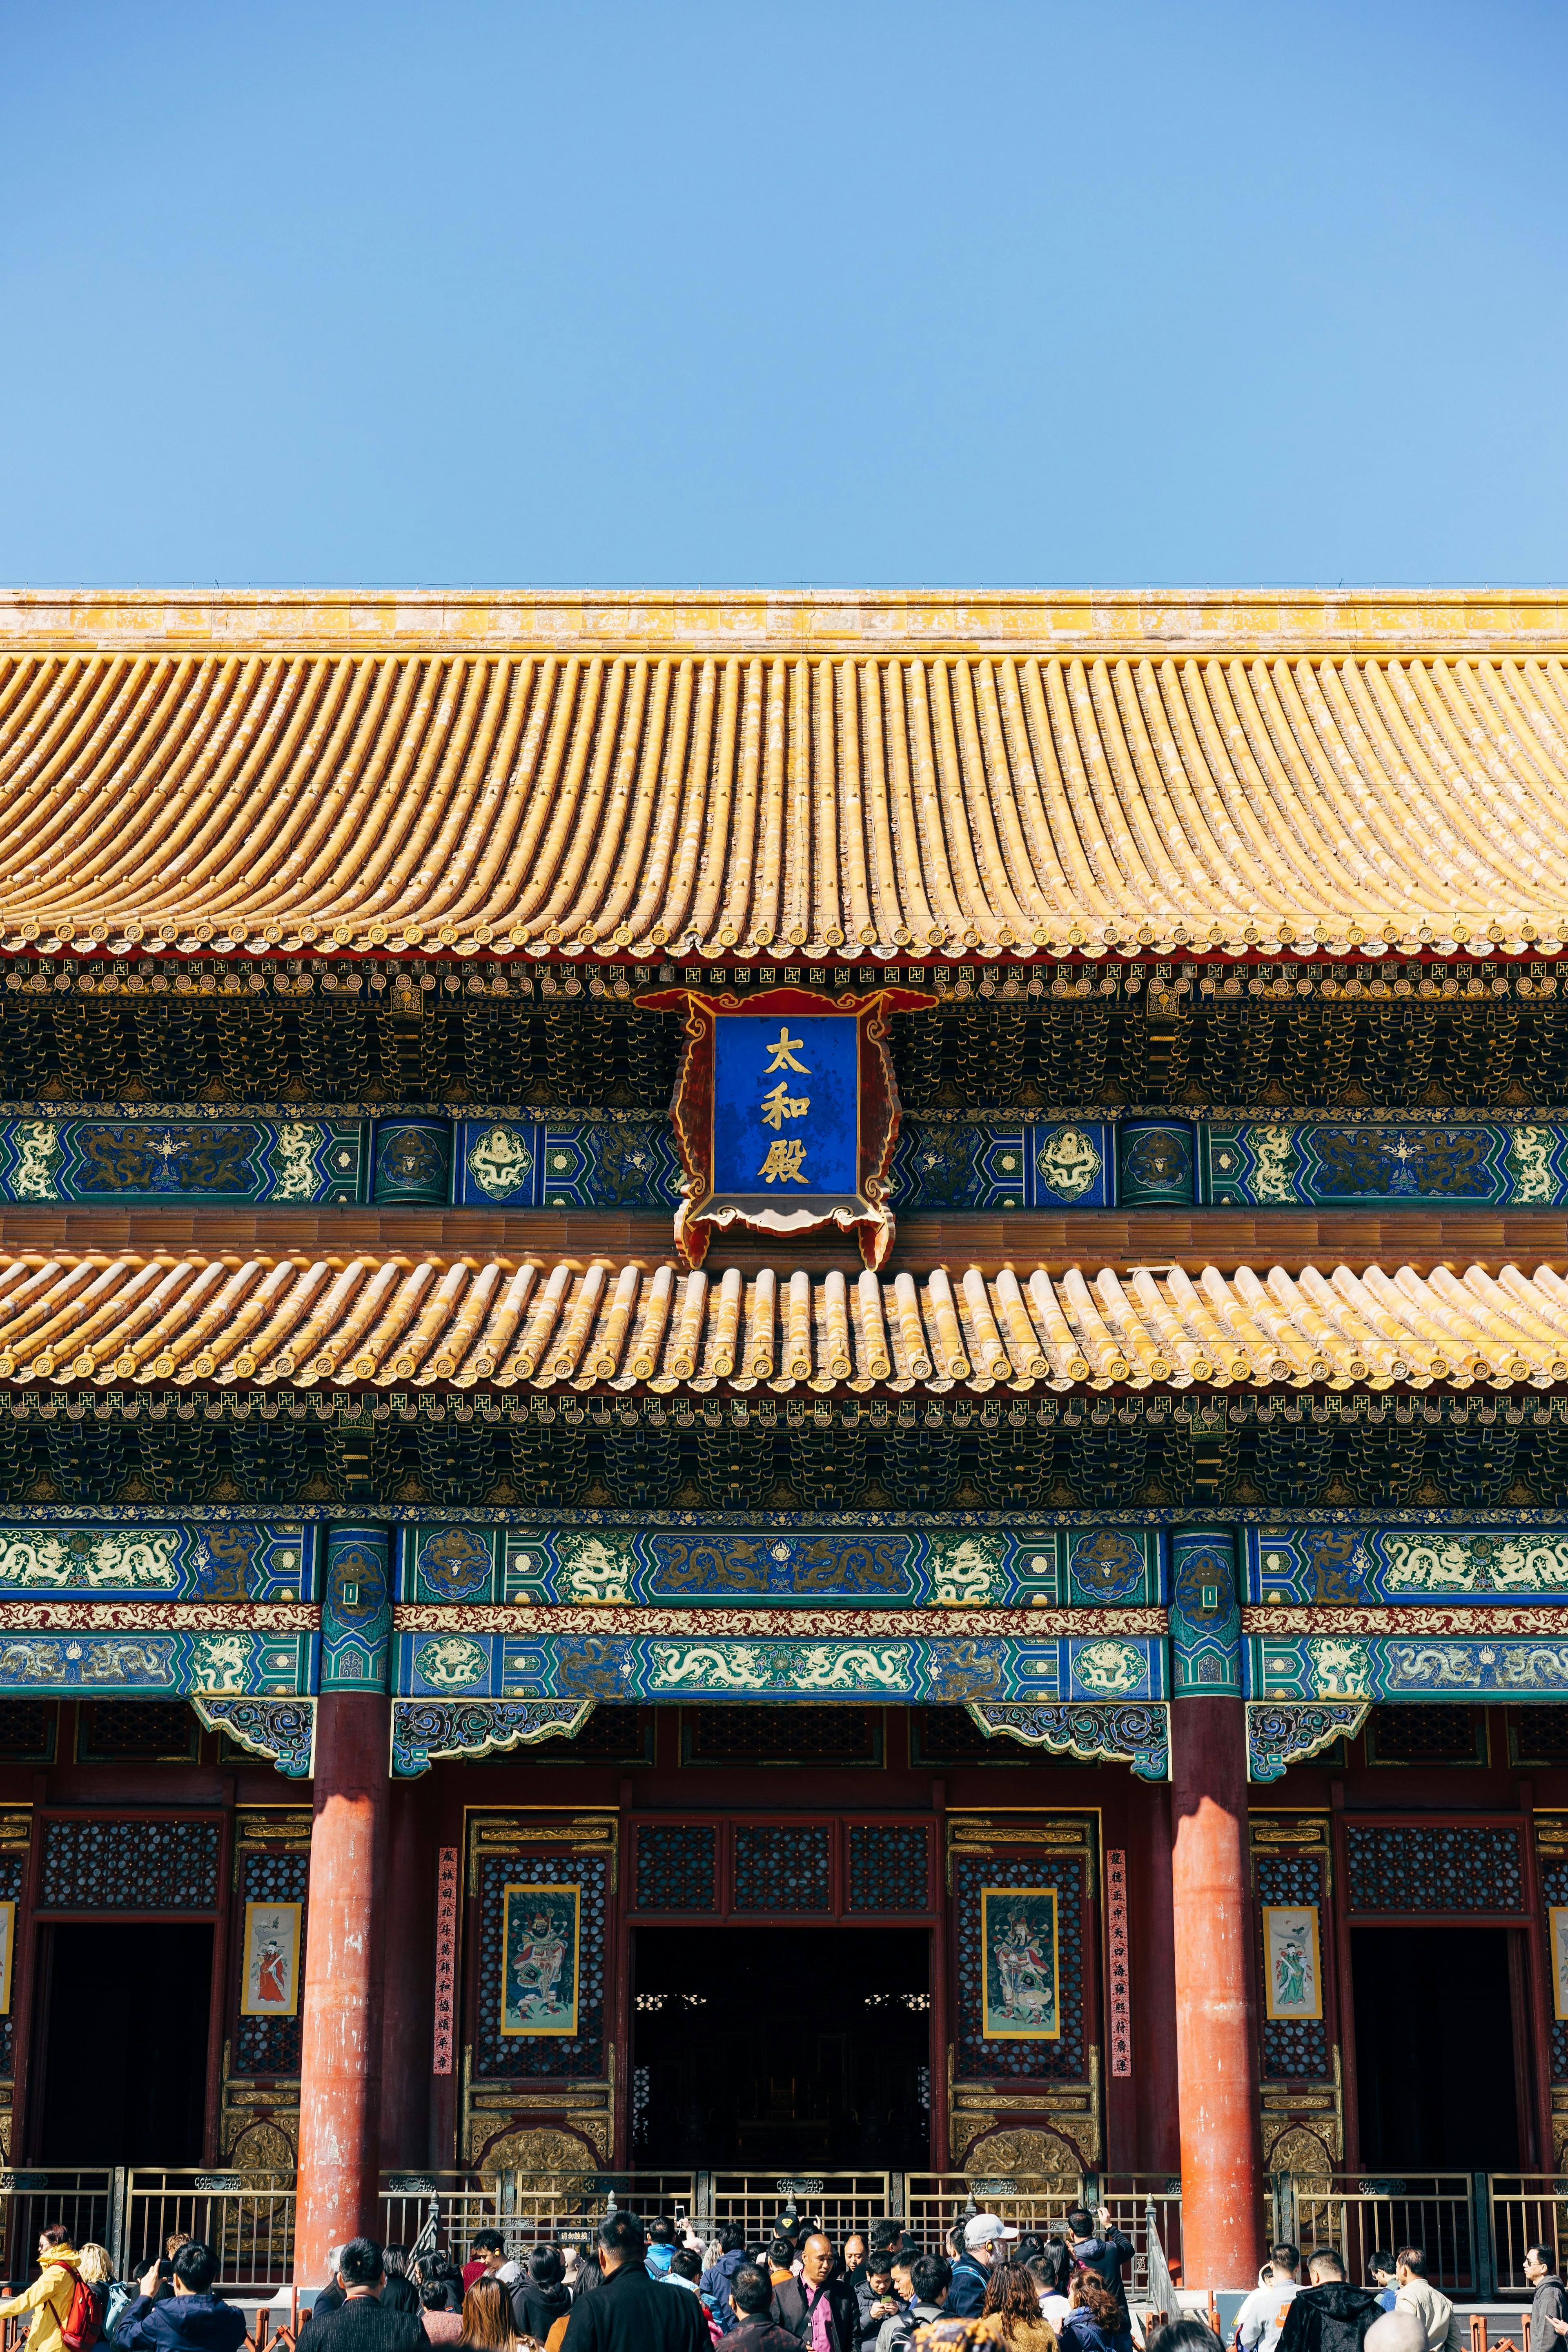 Colorful palace in Forbidden City in China.